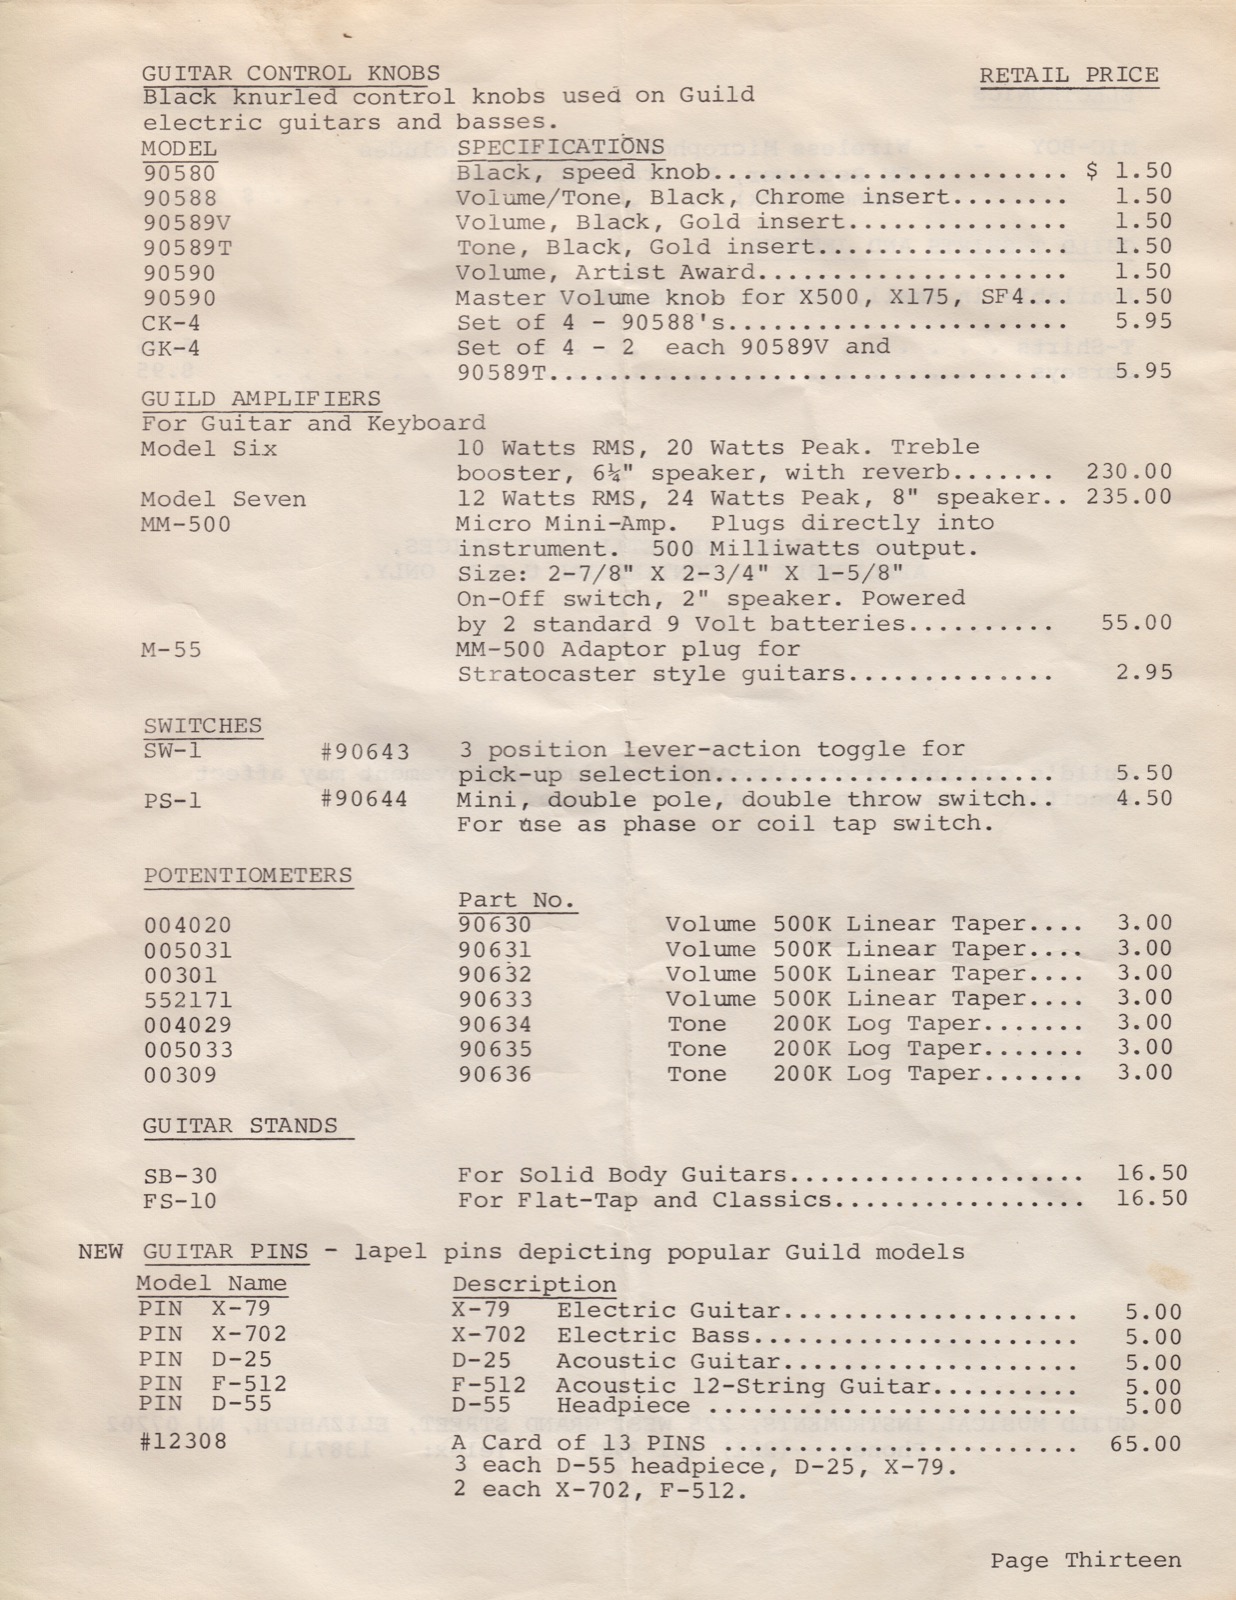 Guild Guitar Price List - 1983 March (A) | GAD's Ramblings